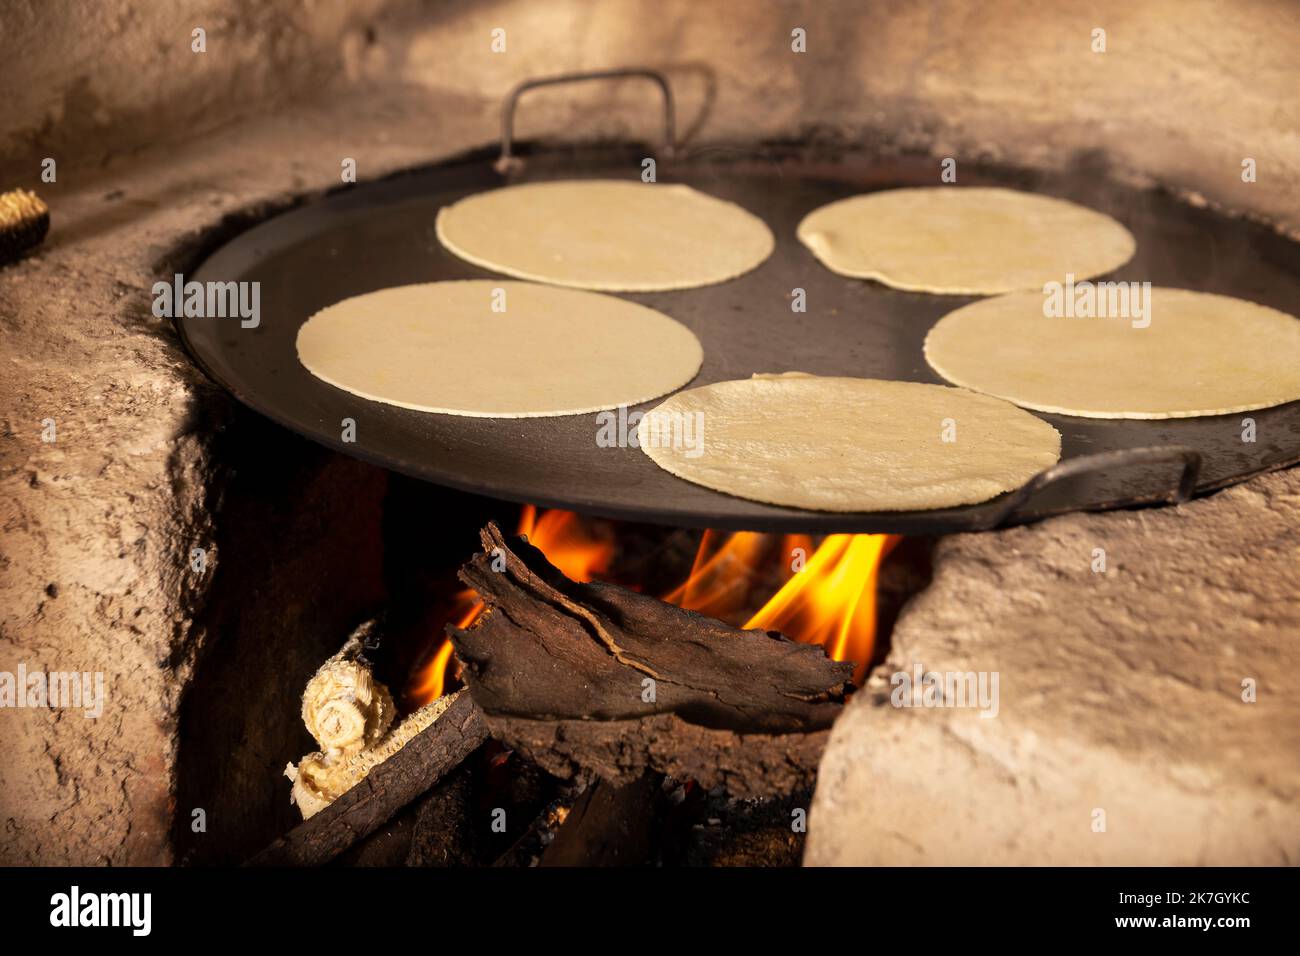 https://c8.alamy.com/comp/2K7GYKC/handmade-corn-tortillas-cooked-in-a-traditional-rustic-wood-stove-called-fogon-type-of-cooking-common-in-rural-communities-in-mexico-and-other-coun-2K7GYKC.jpg